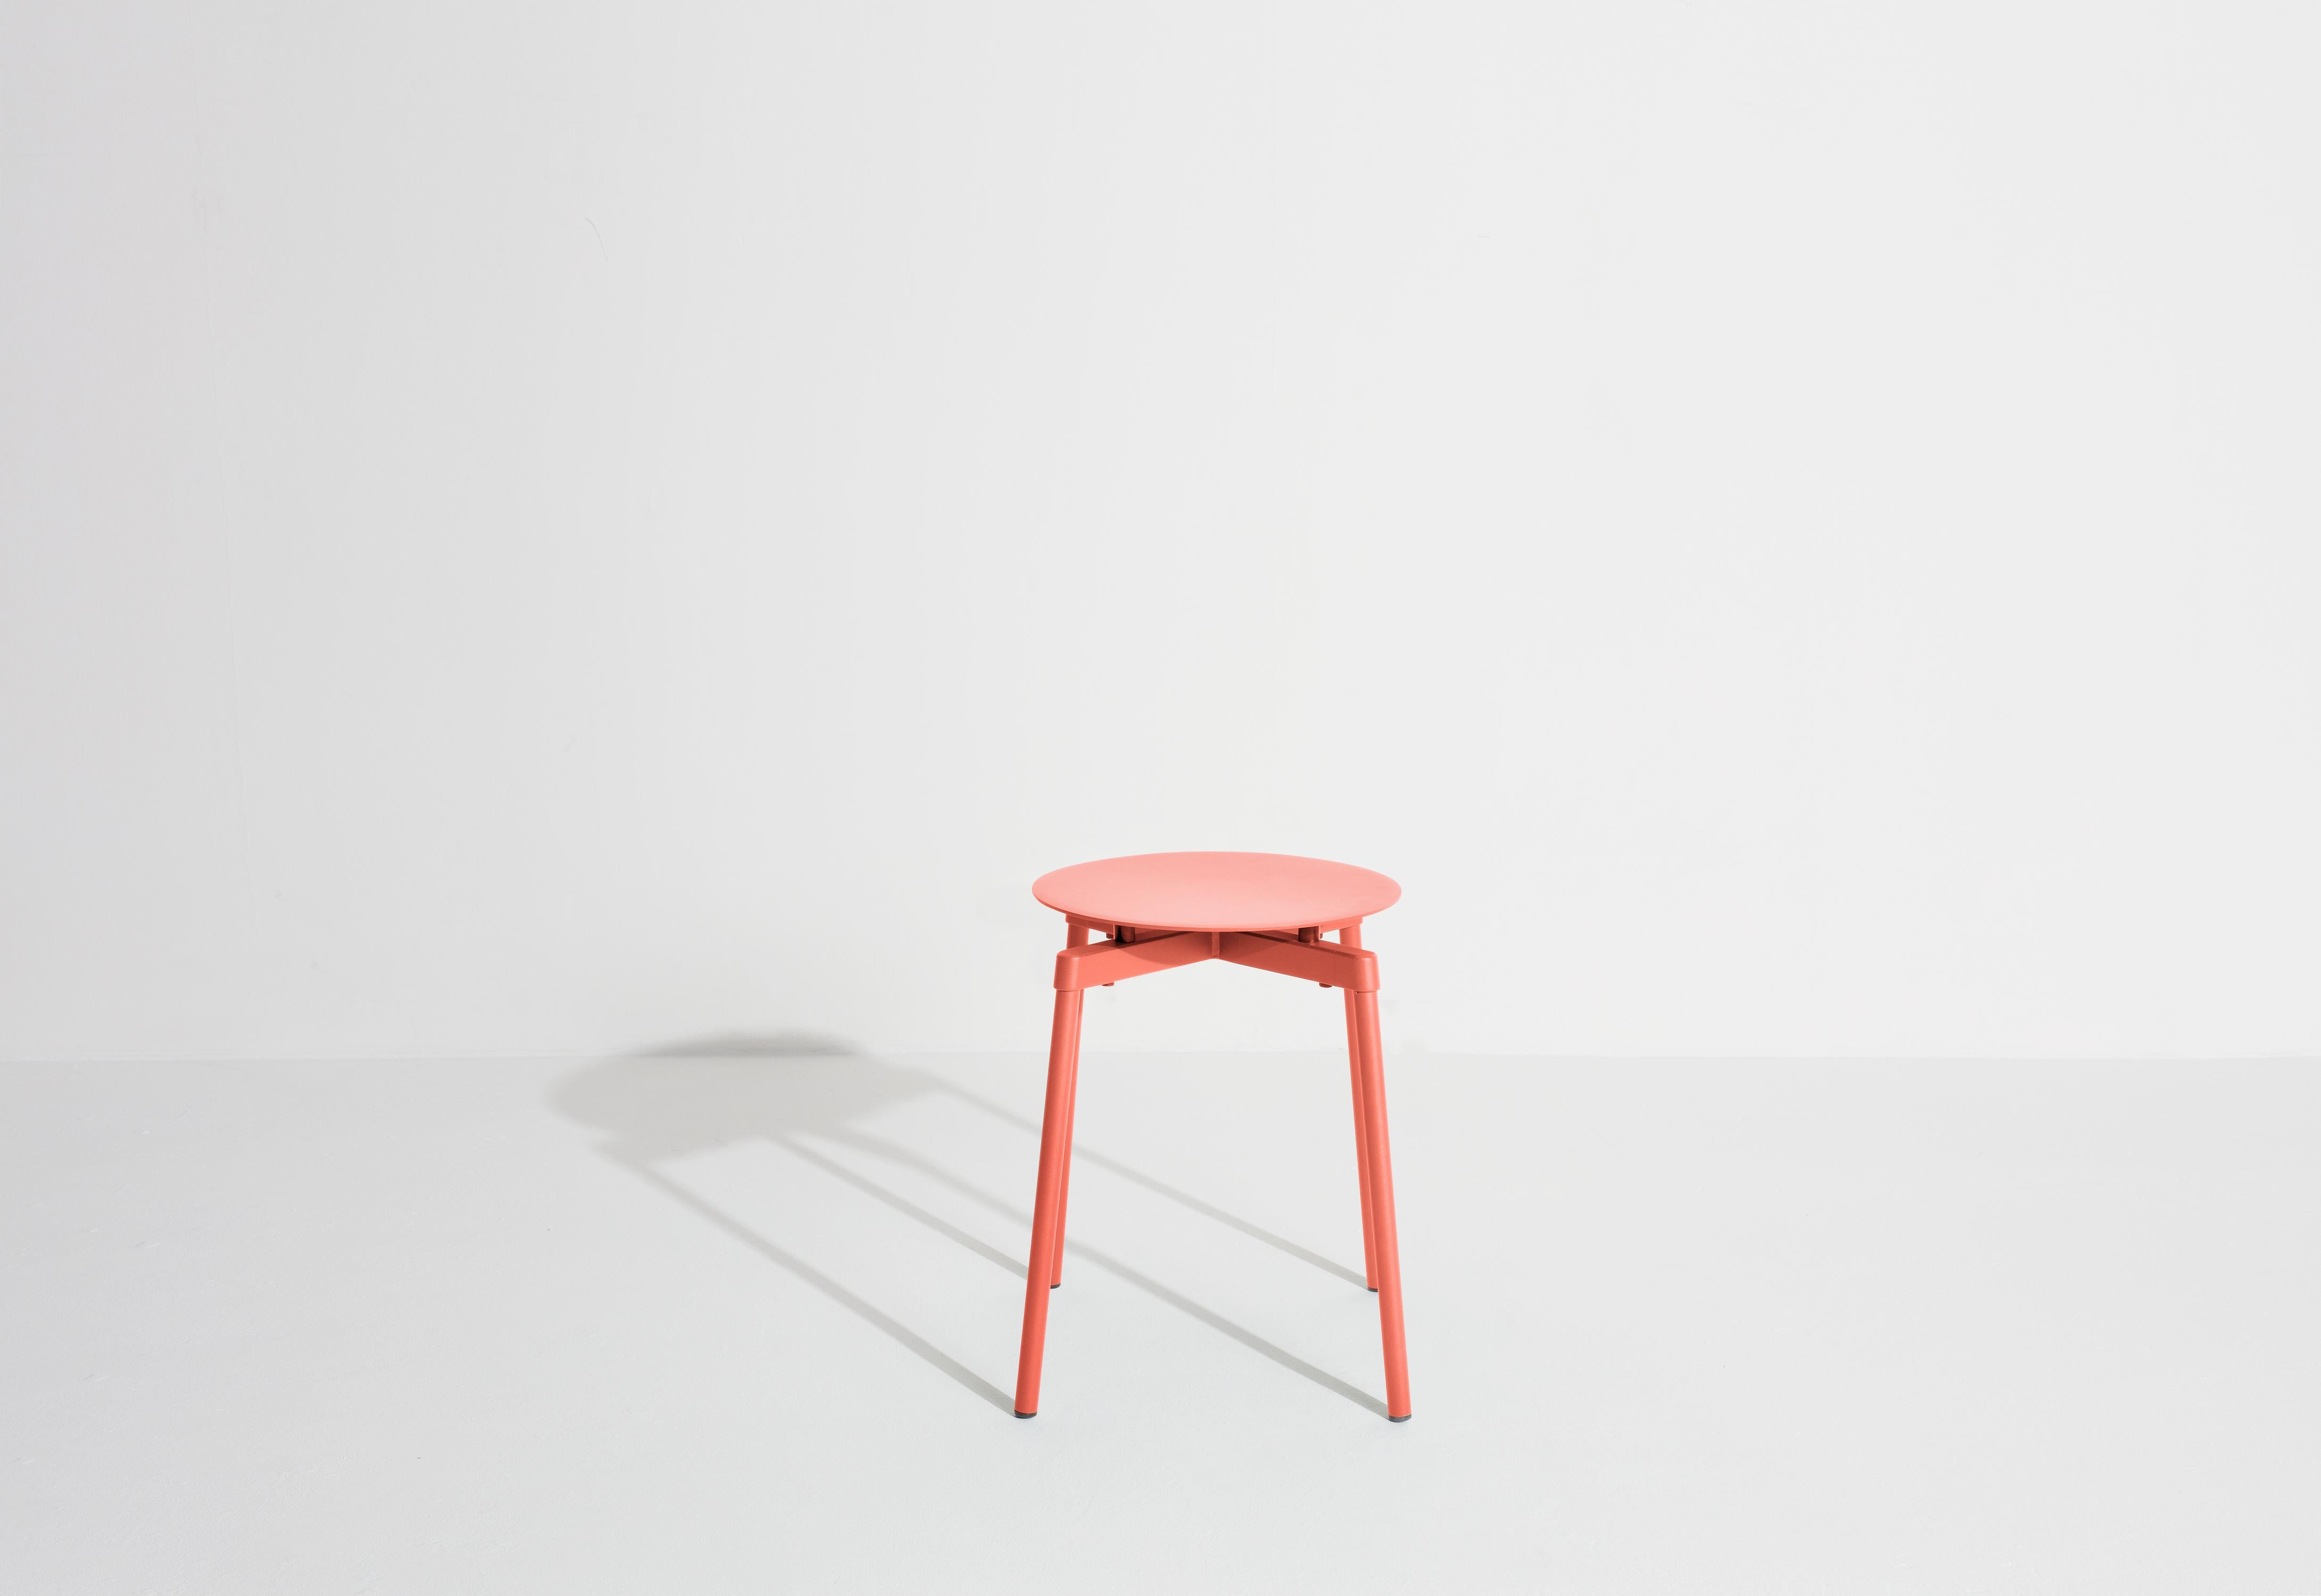 Petite Friture Fromme Stool in Coral Aluminium by Tom Chung, 2020 In New Condition For Sale In Brooklyn, NY